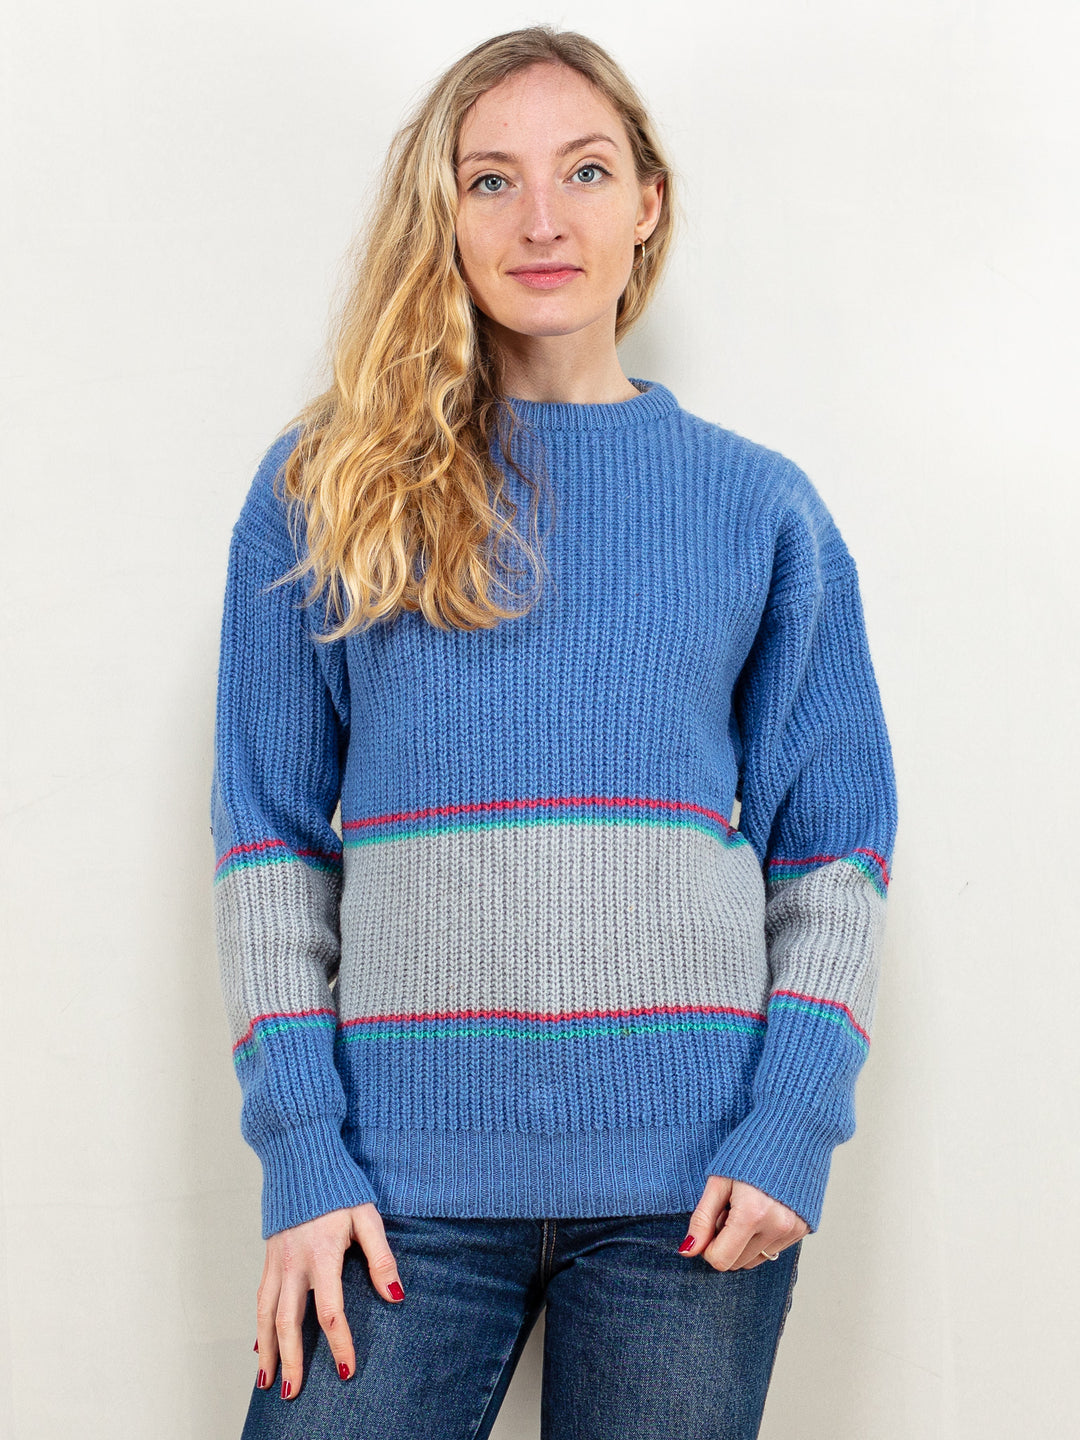 Shetland Wool Sweater vintage 90's apres ski blue wool pullover crew neck sweater cottagecore women jumper sustainable kappahl size small